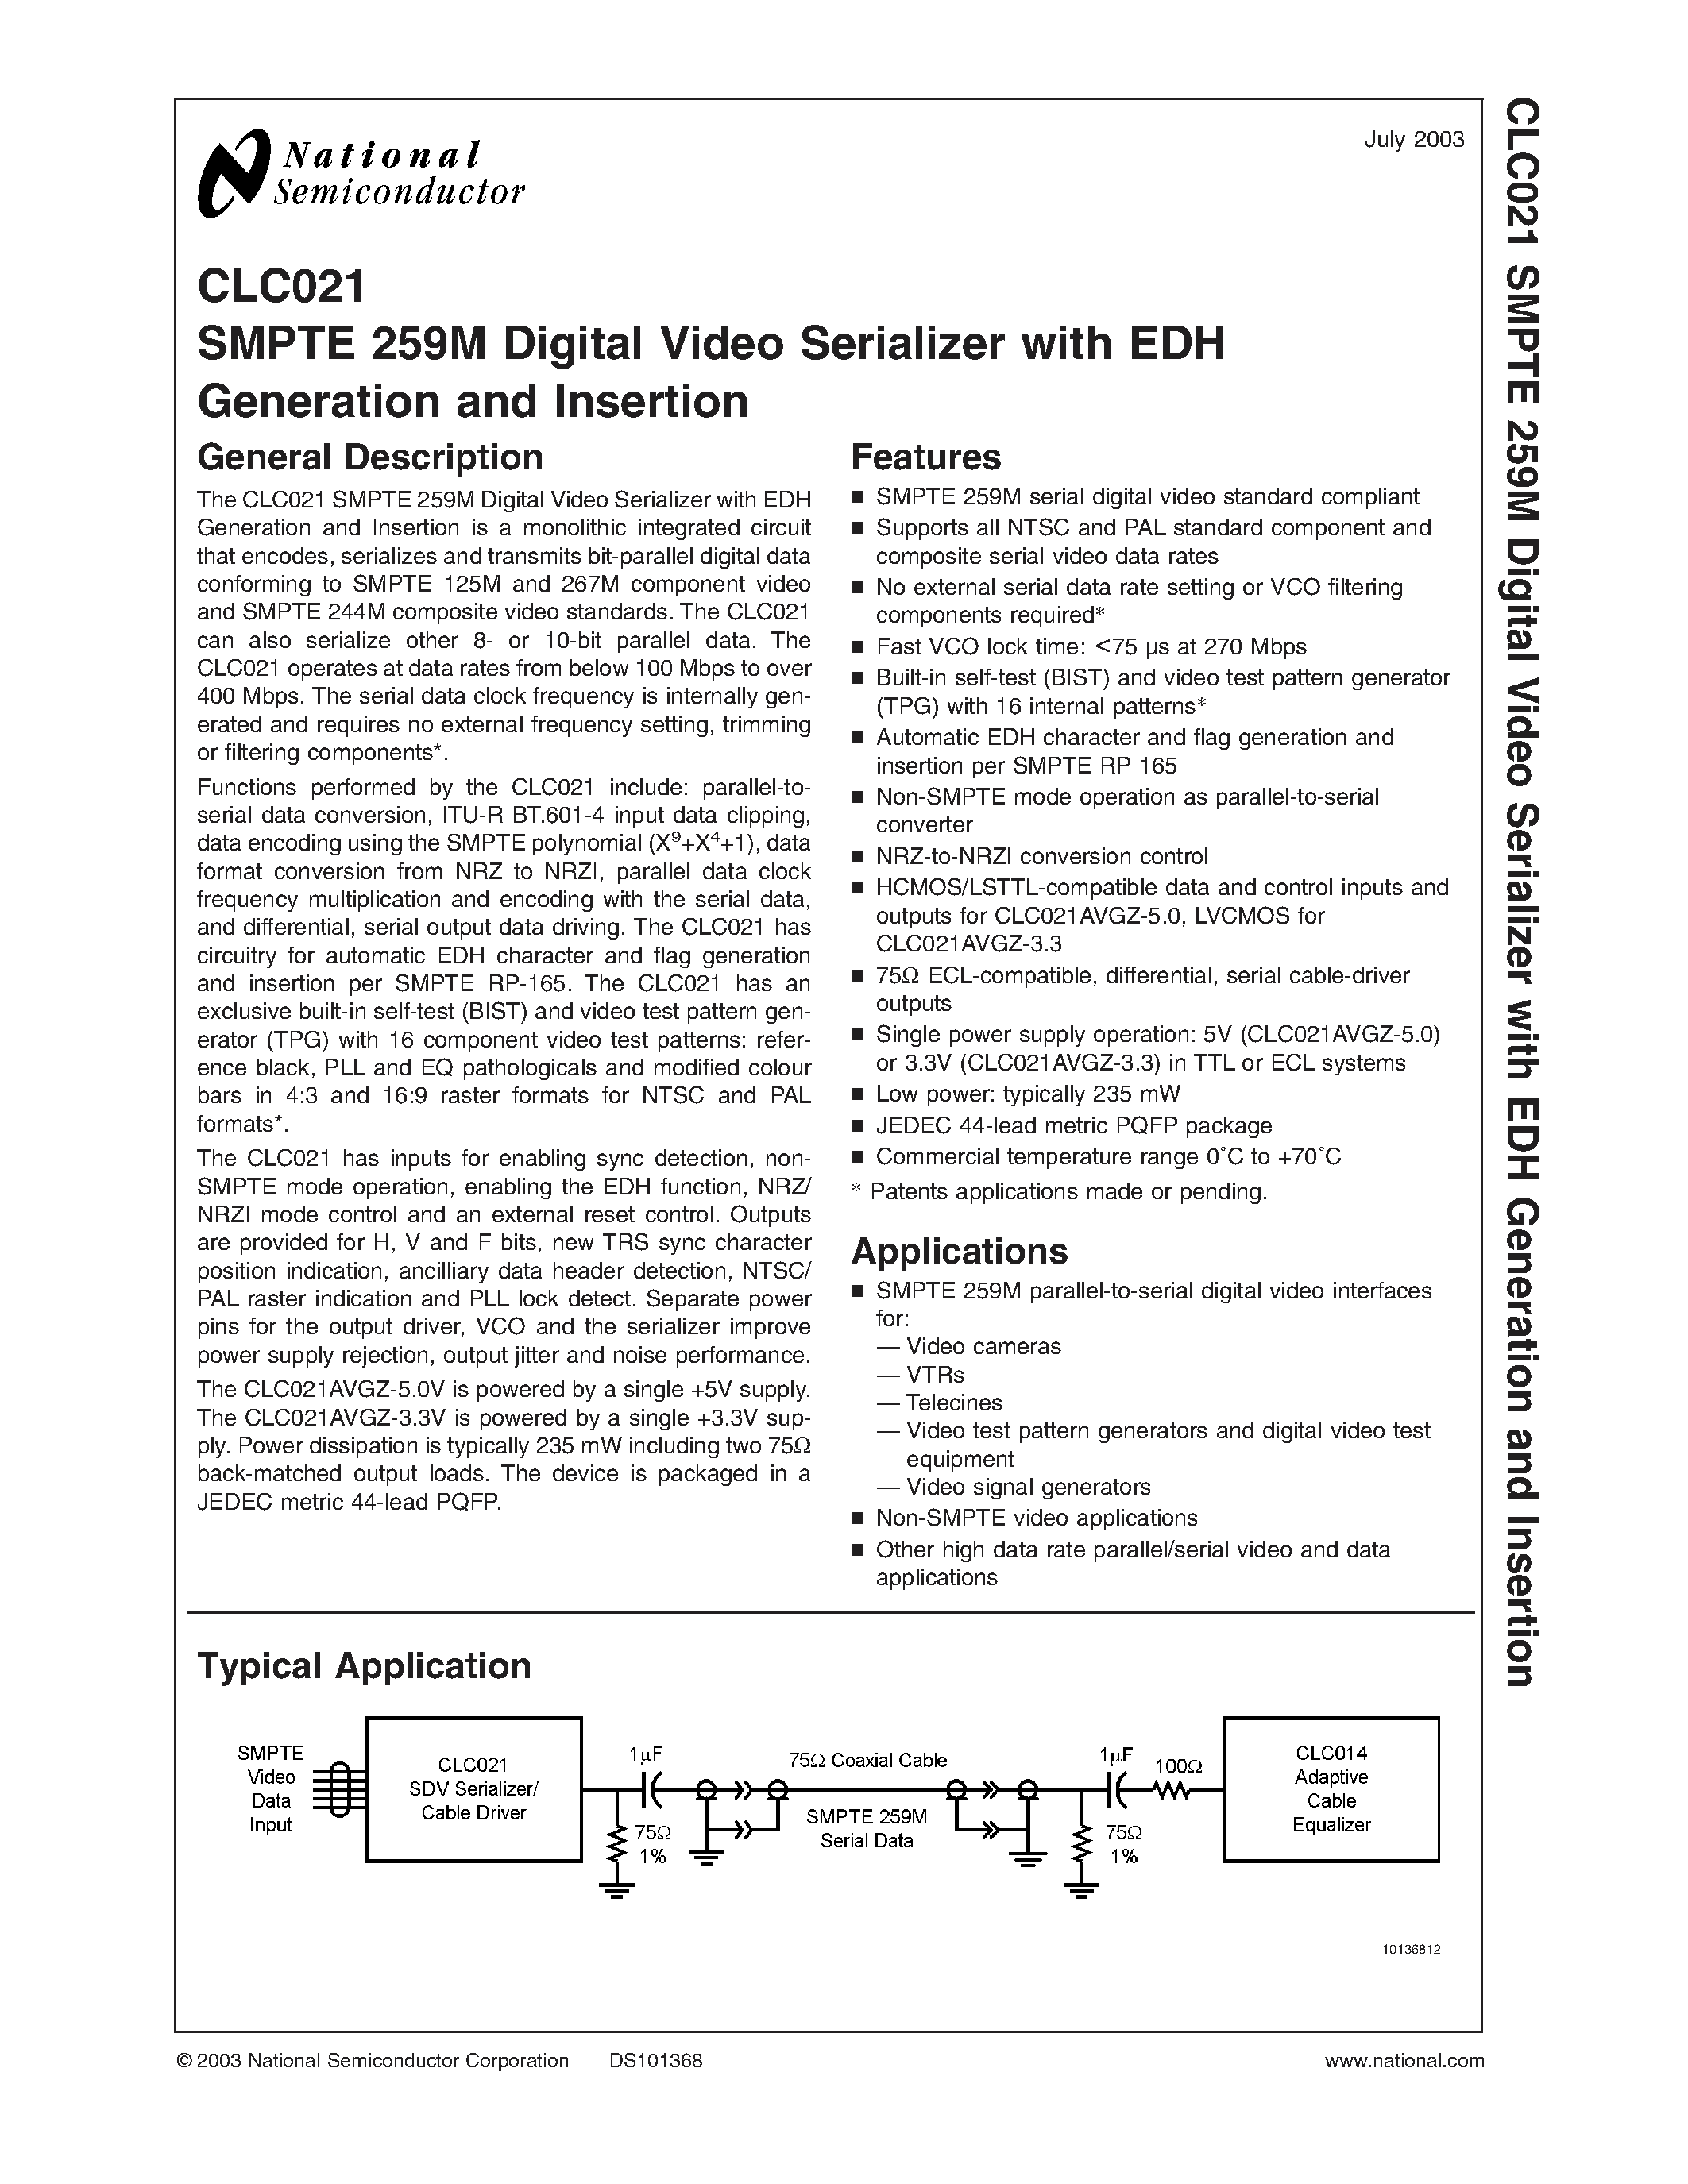 Даташит CLC021 - SMPTE 259M Digital Video Serializer with EDH Generation and Insertion страница 1